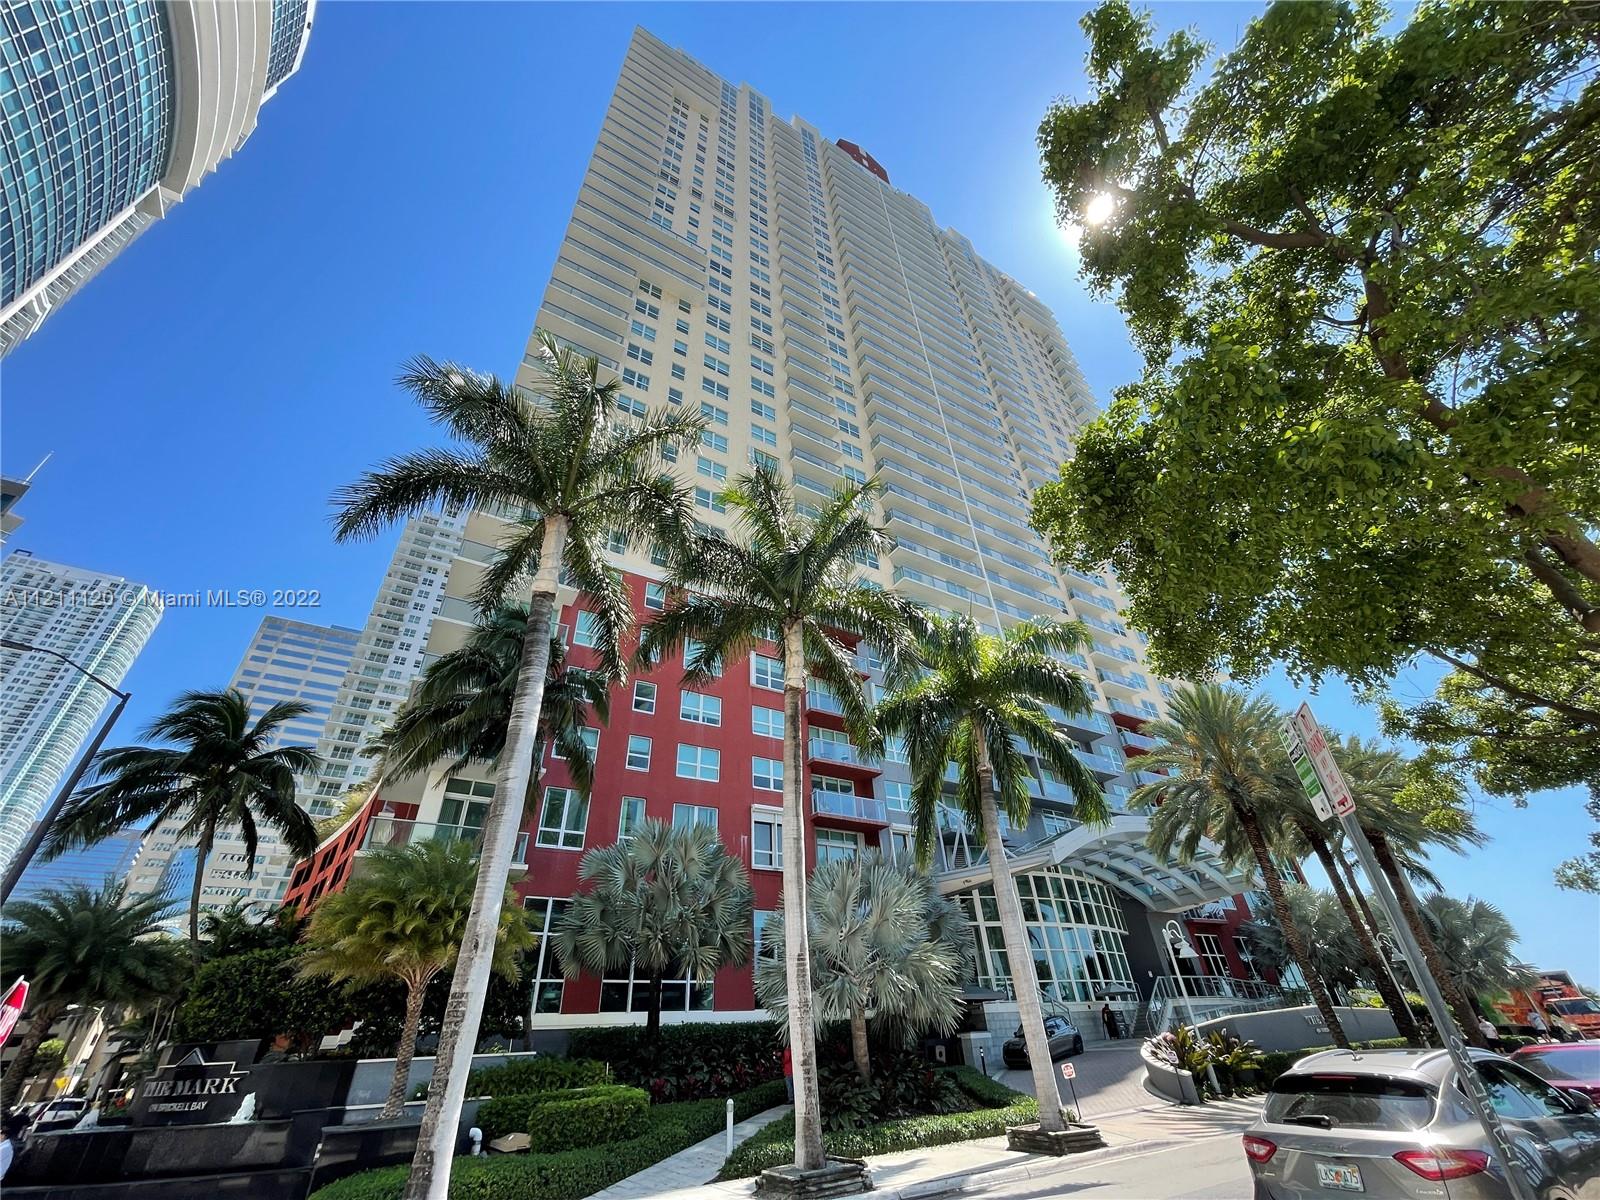 Spacious unit at the The Mark on Brickell! Open floor plan with ample master suite and walk-in closet. Den is currently set up as a second bedroom. Full size washer and dryer. Bring your creativity and make this an awesome Brickell Condo! One assigned space and one valet. Building offers such amenities as pool, gym, tennis courts, and ground level fine dining with gorgeous water views! Walking distance to the City Center Mall, Mary Brickell Village and Publix! Association allows for a 30 day minimum rental up to 12 times per year. A great opportunity!